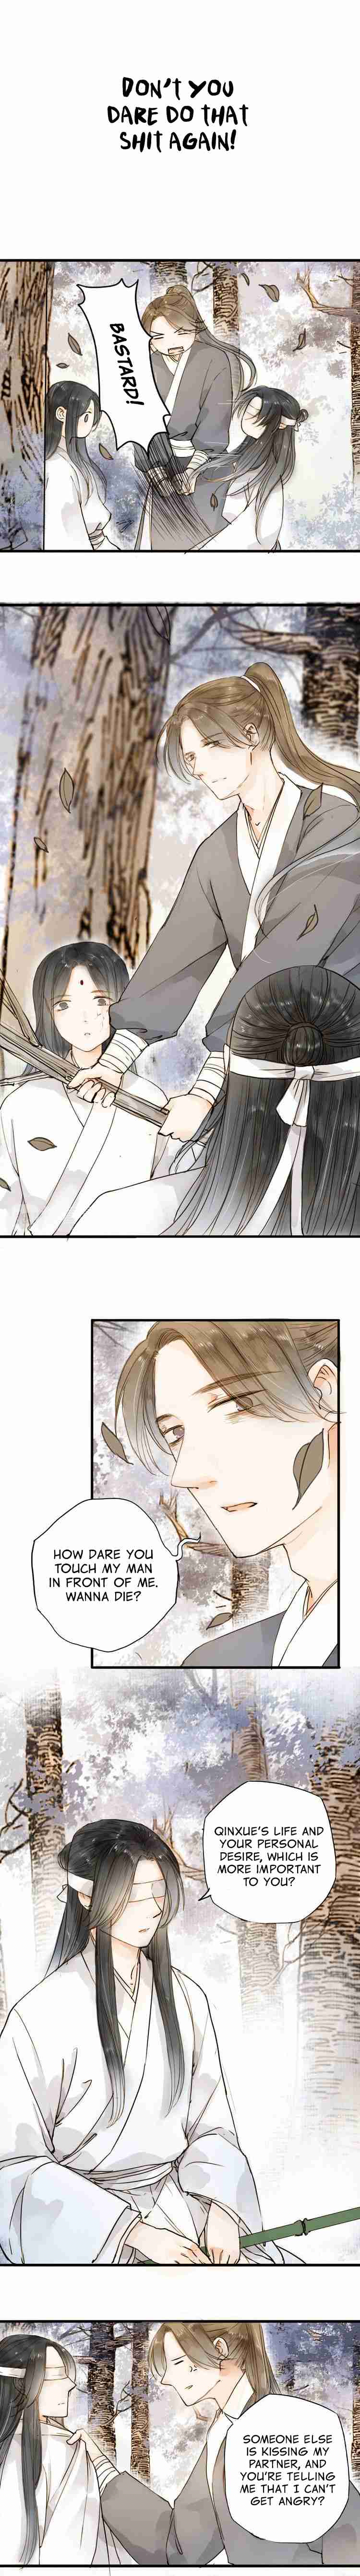 As Lovely as the Peach Blossoms Ch. 23 No Use Hiding